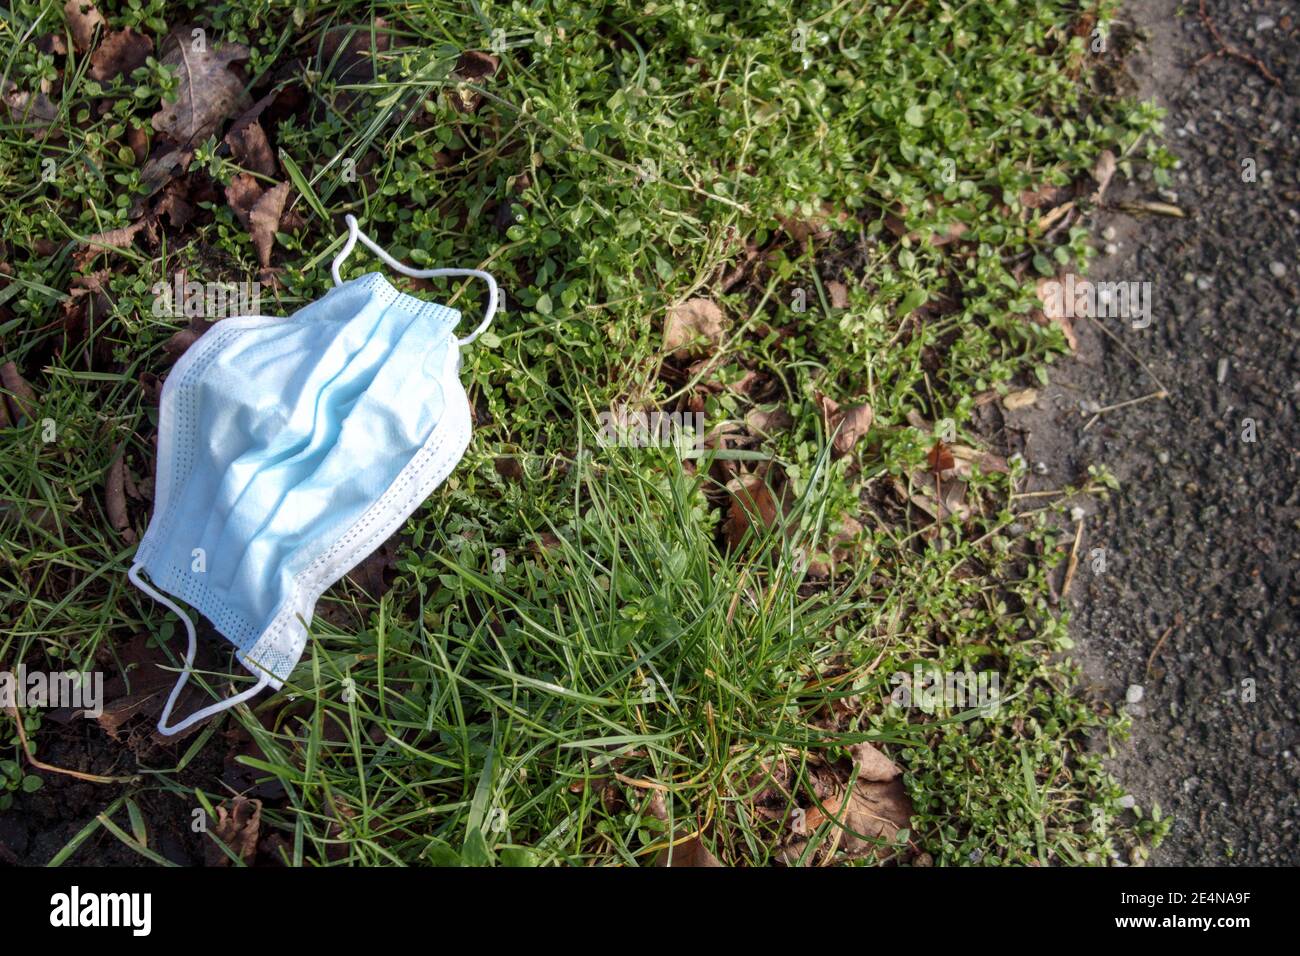 Used medical face mask discard besides the road. Waste during COVID-19 pandemic Stock Photo